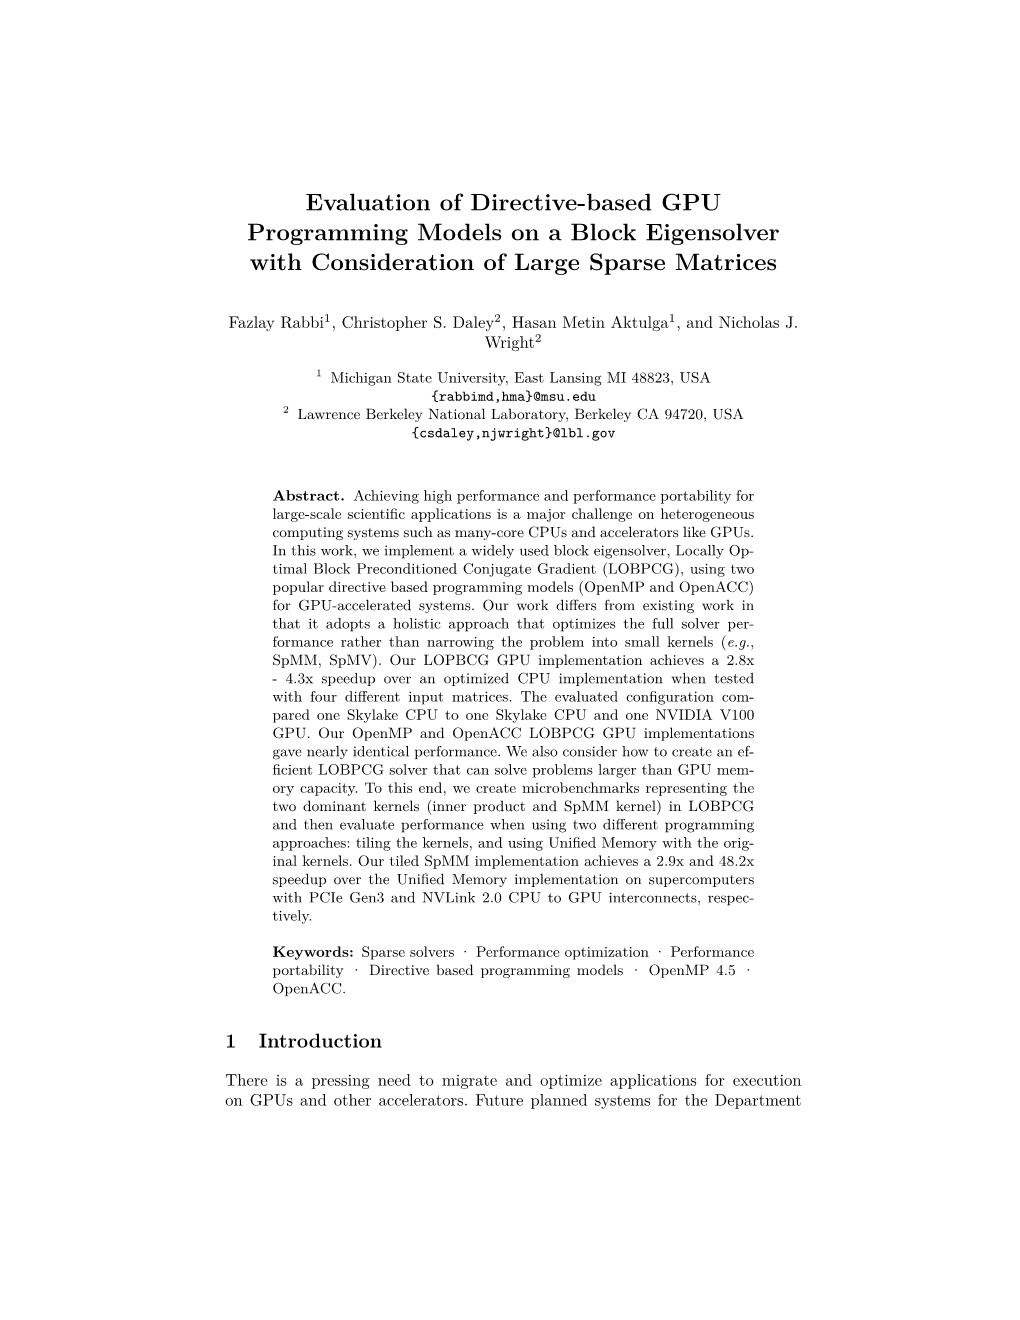 Evaluation of Directive-Based GPU Programming Models on a Block Eigensolver with Consideration of Large Sparse Matrices